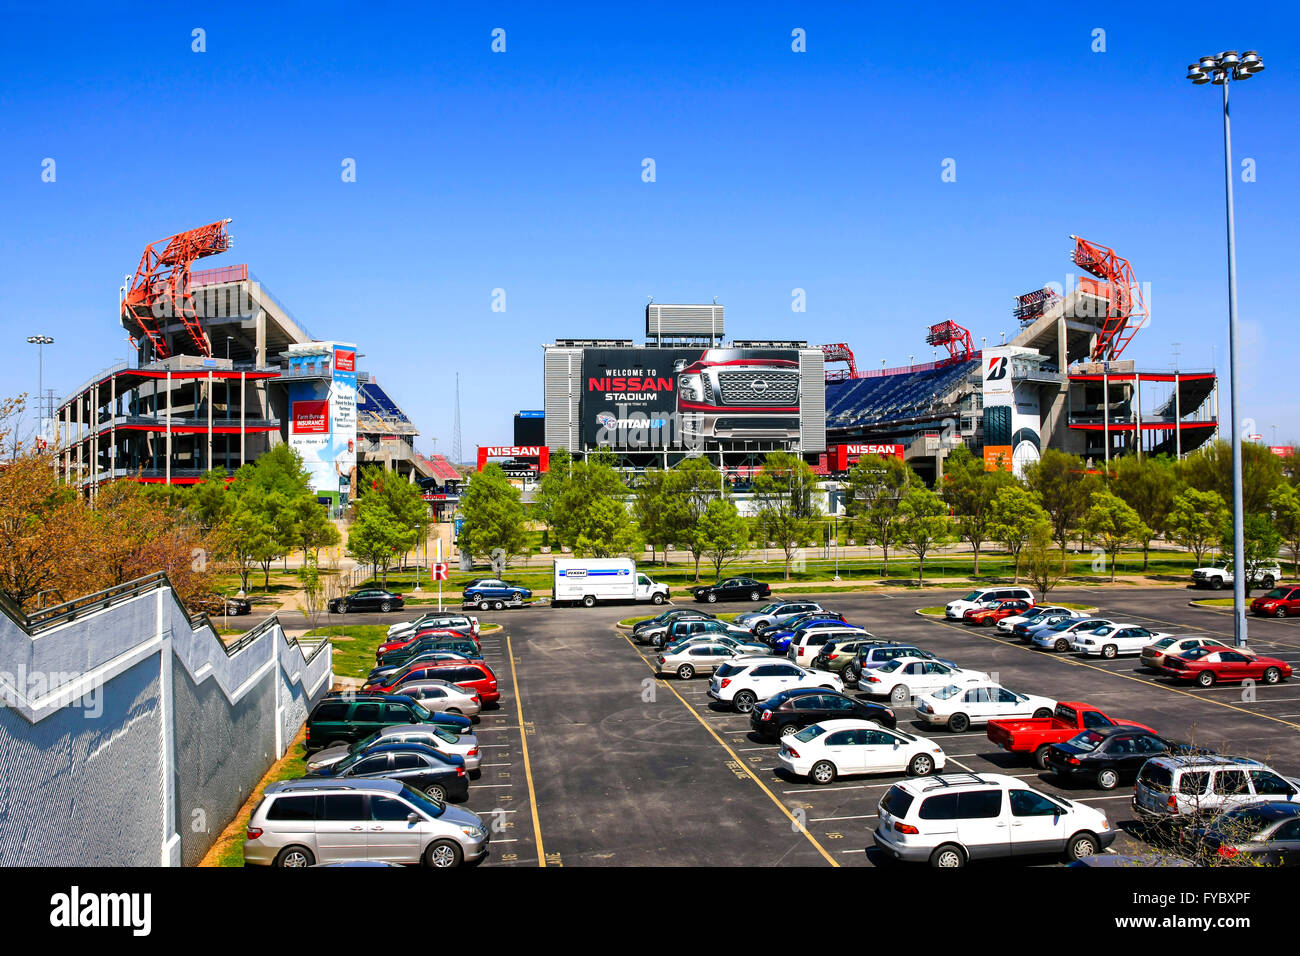 The Nissan Stadium in Nashville, home of the Tennessee Titans football team Stock Photo